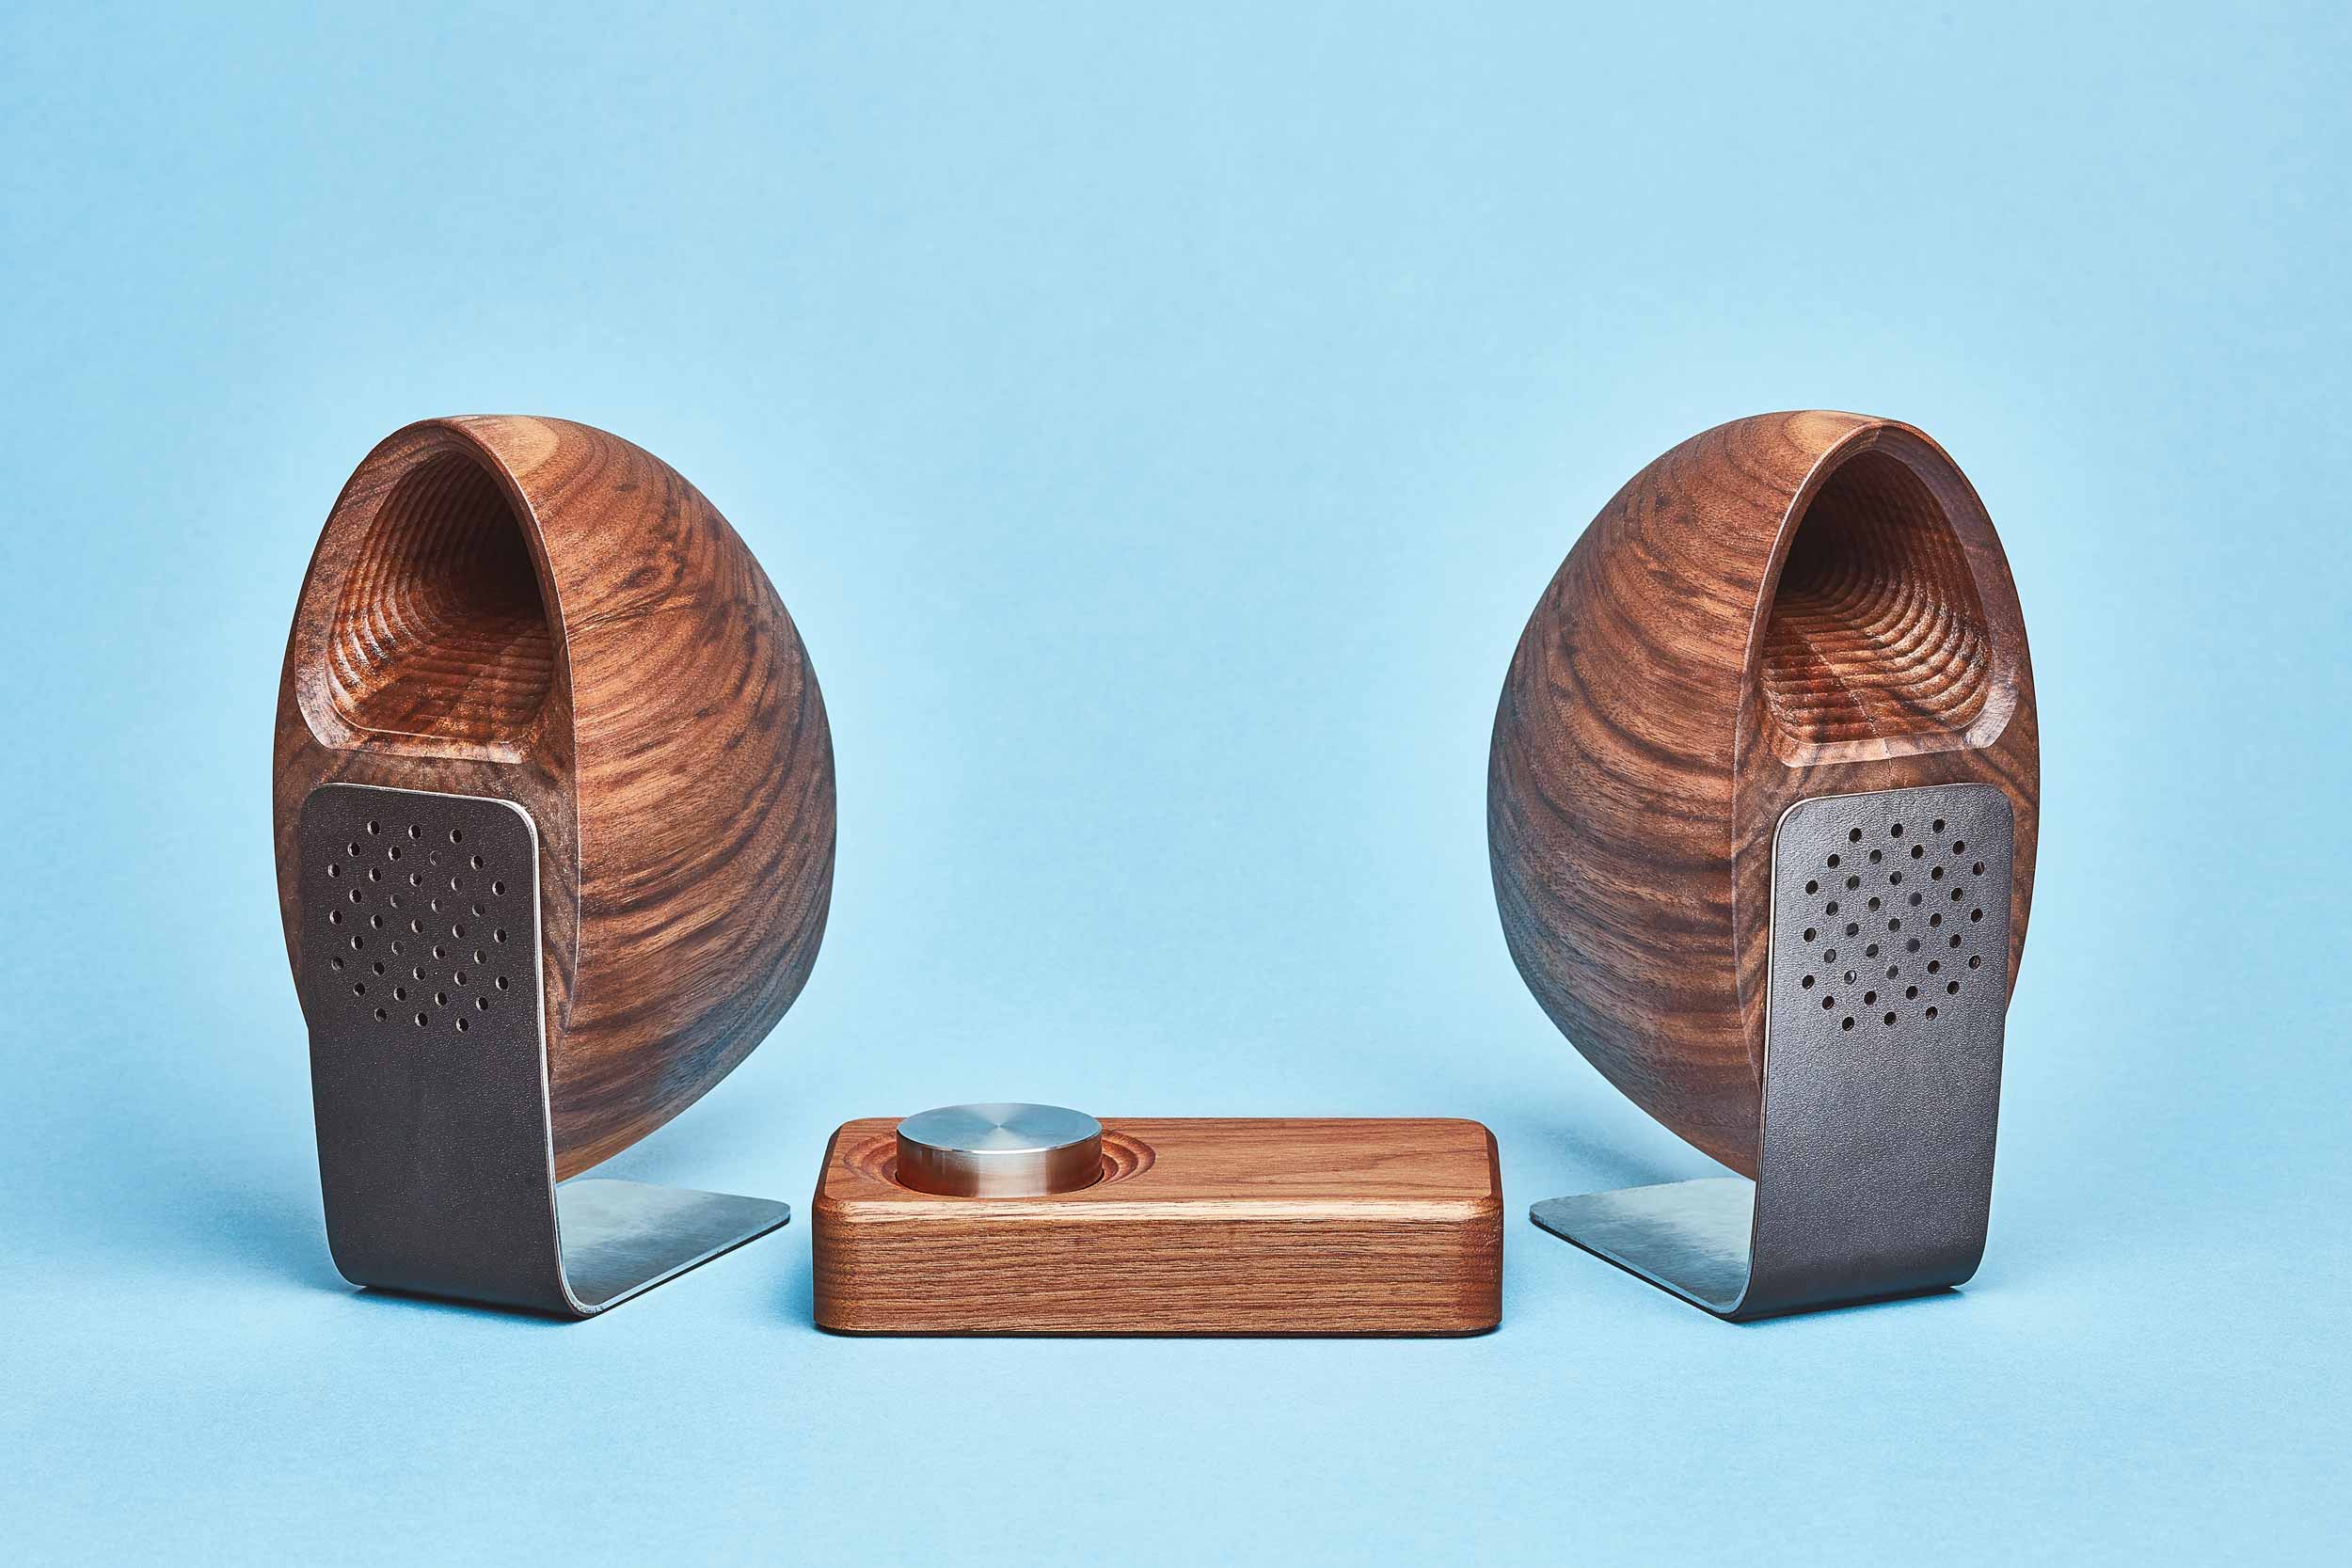 Check Out This Speaker Made out of Mushrooms?